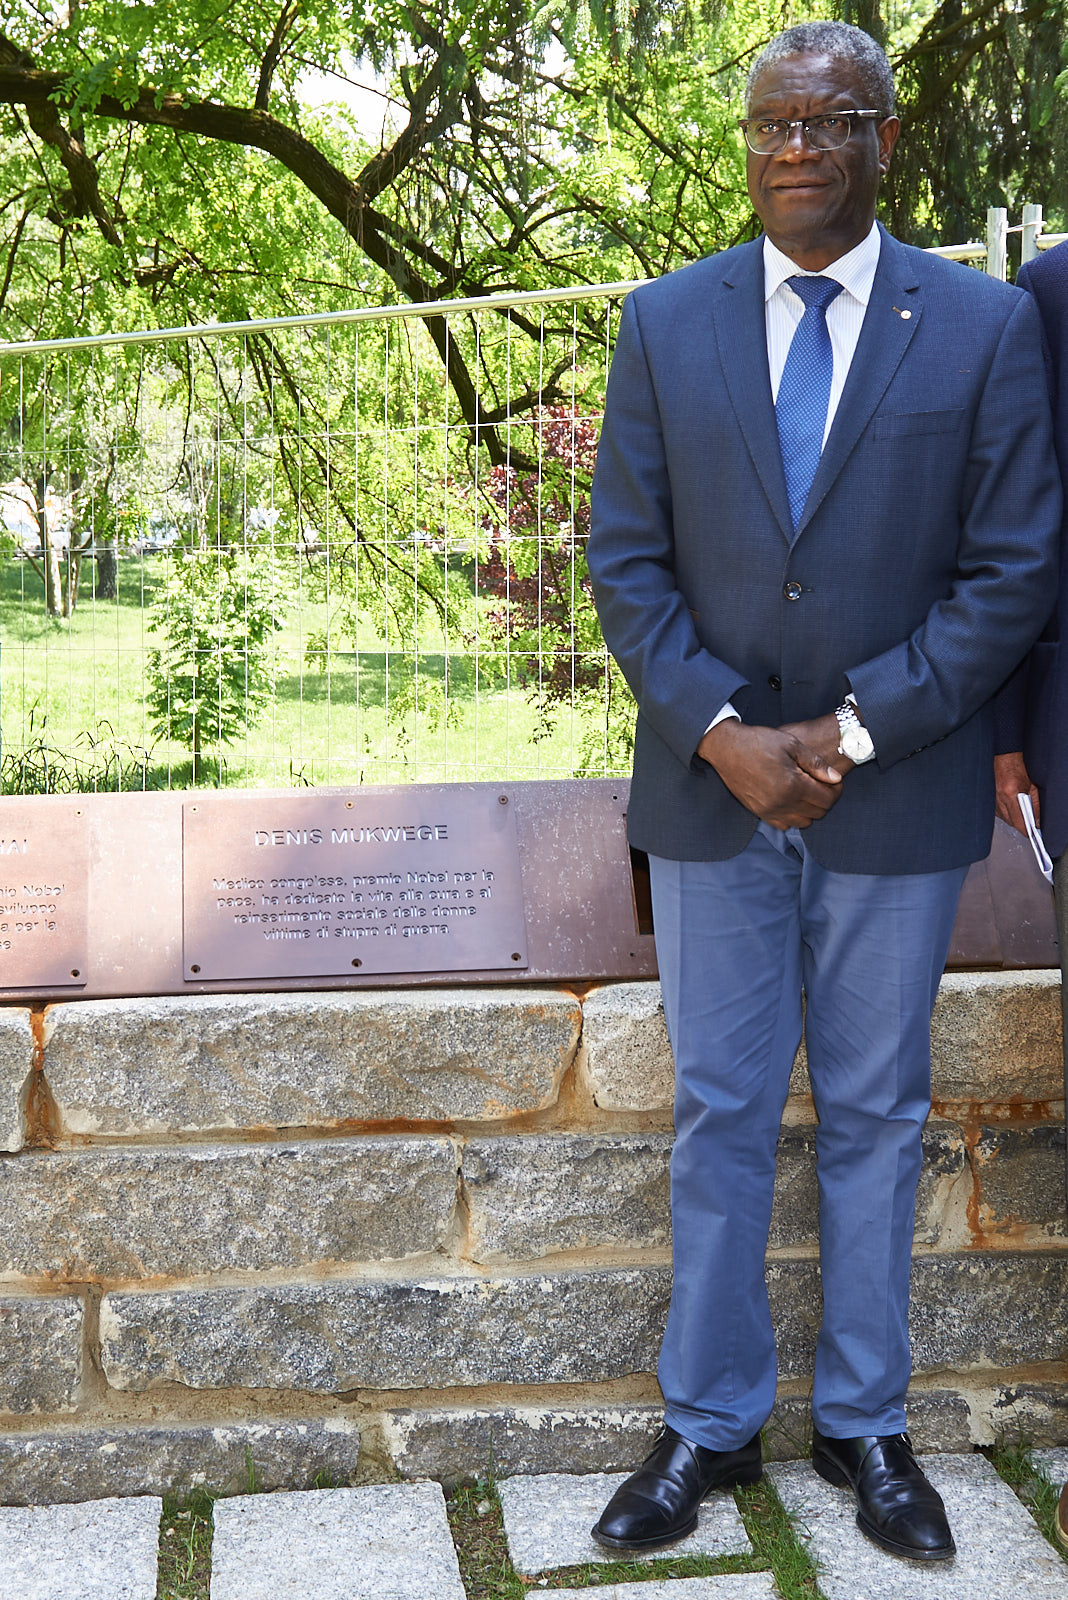 Dr. Mukwege with the plaque dedicated to him 